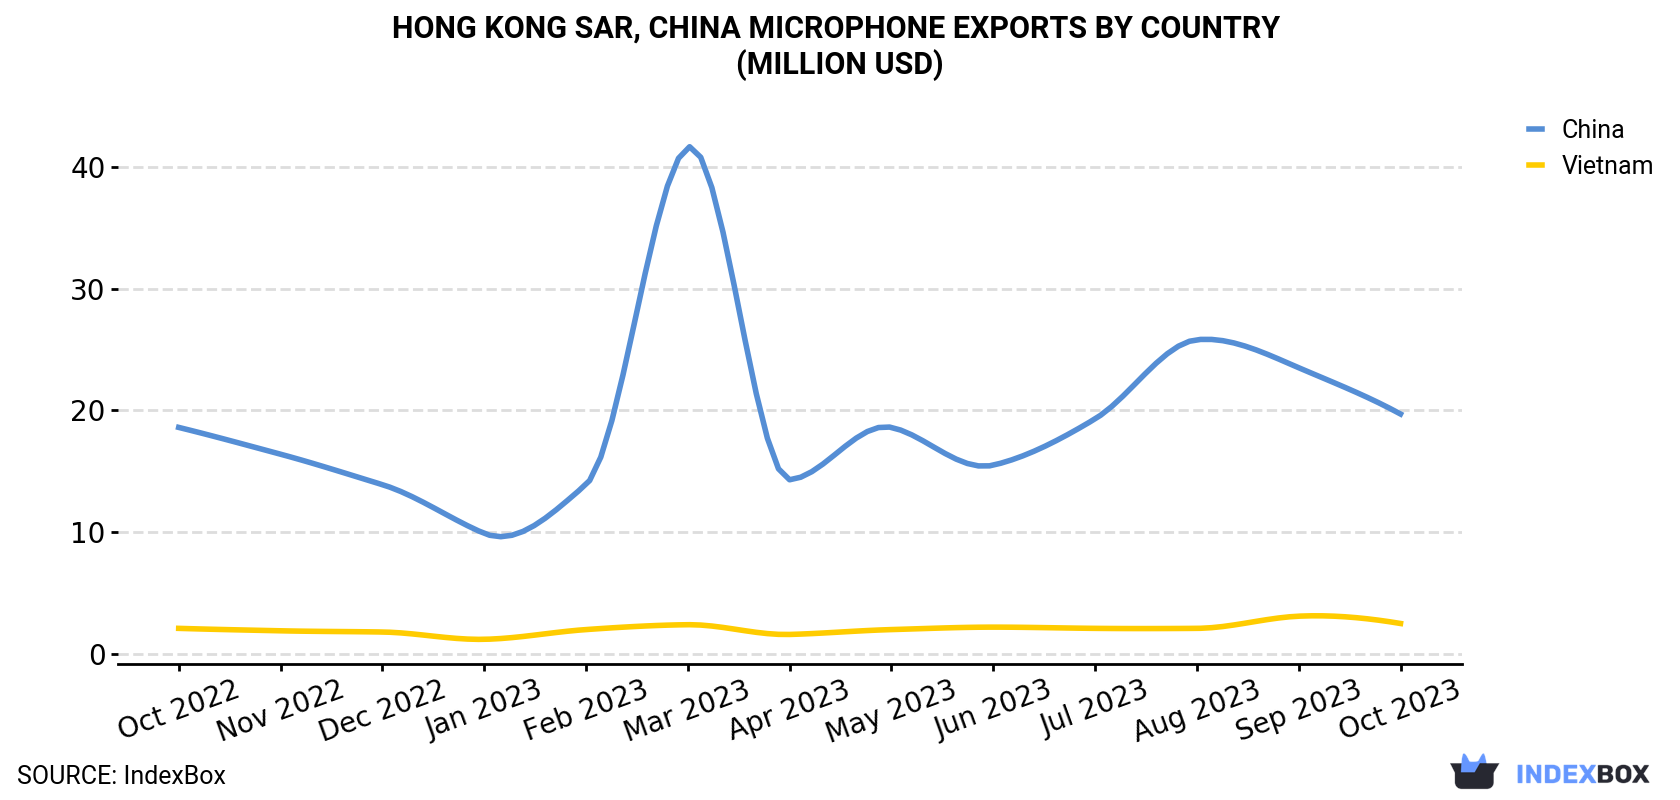 Hong Kong Microphone Exports By Country (Million USD)